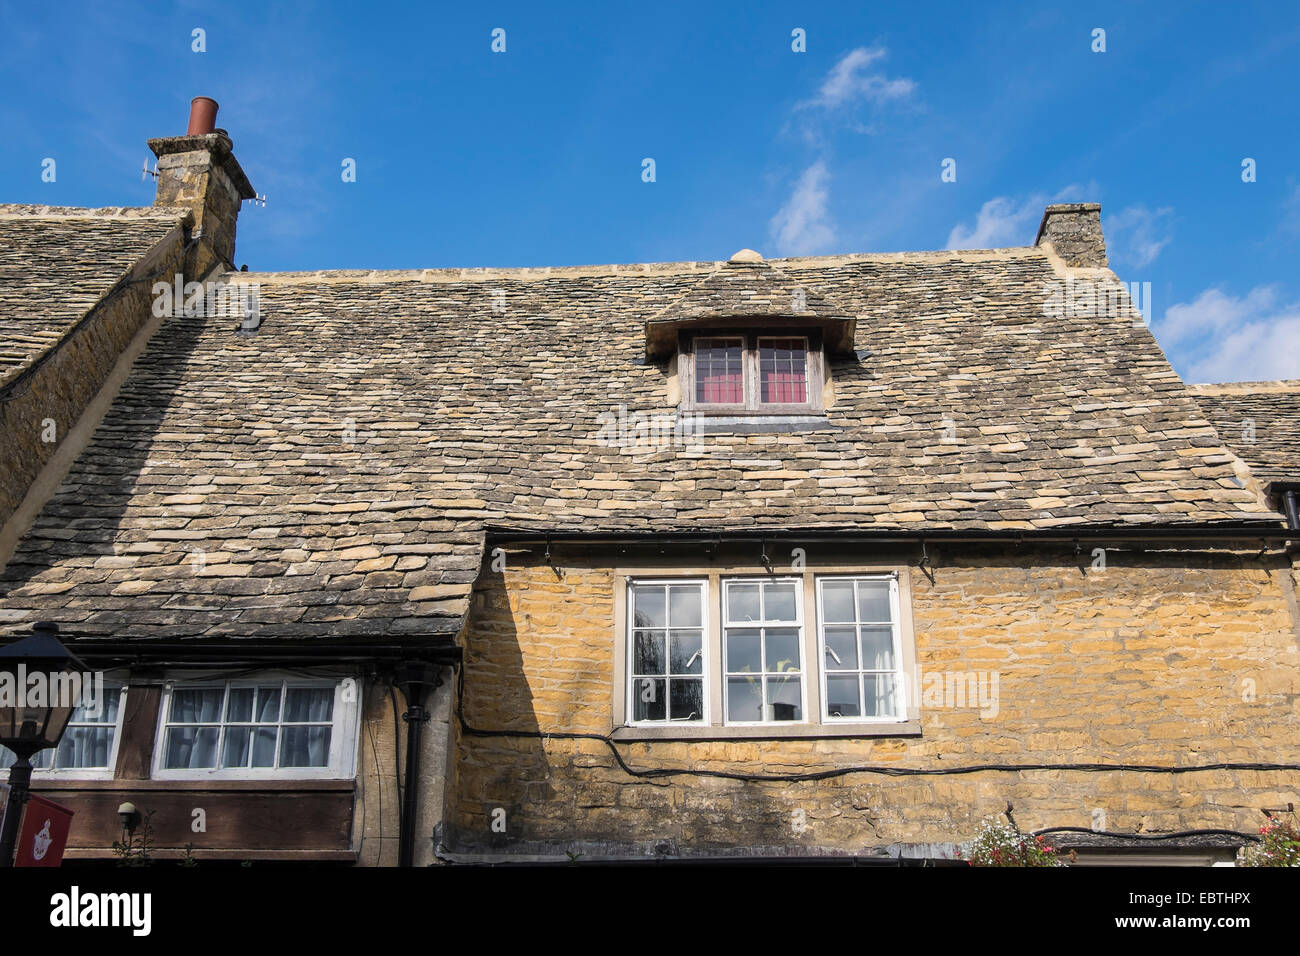 Cotswold stone roof tiles dormer window Bourton-on-the-Water Cotswolds village Gloucestershire Stock Photo